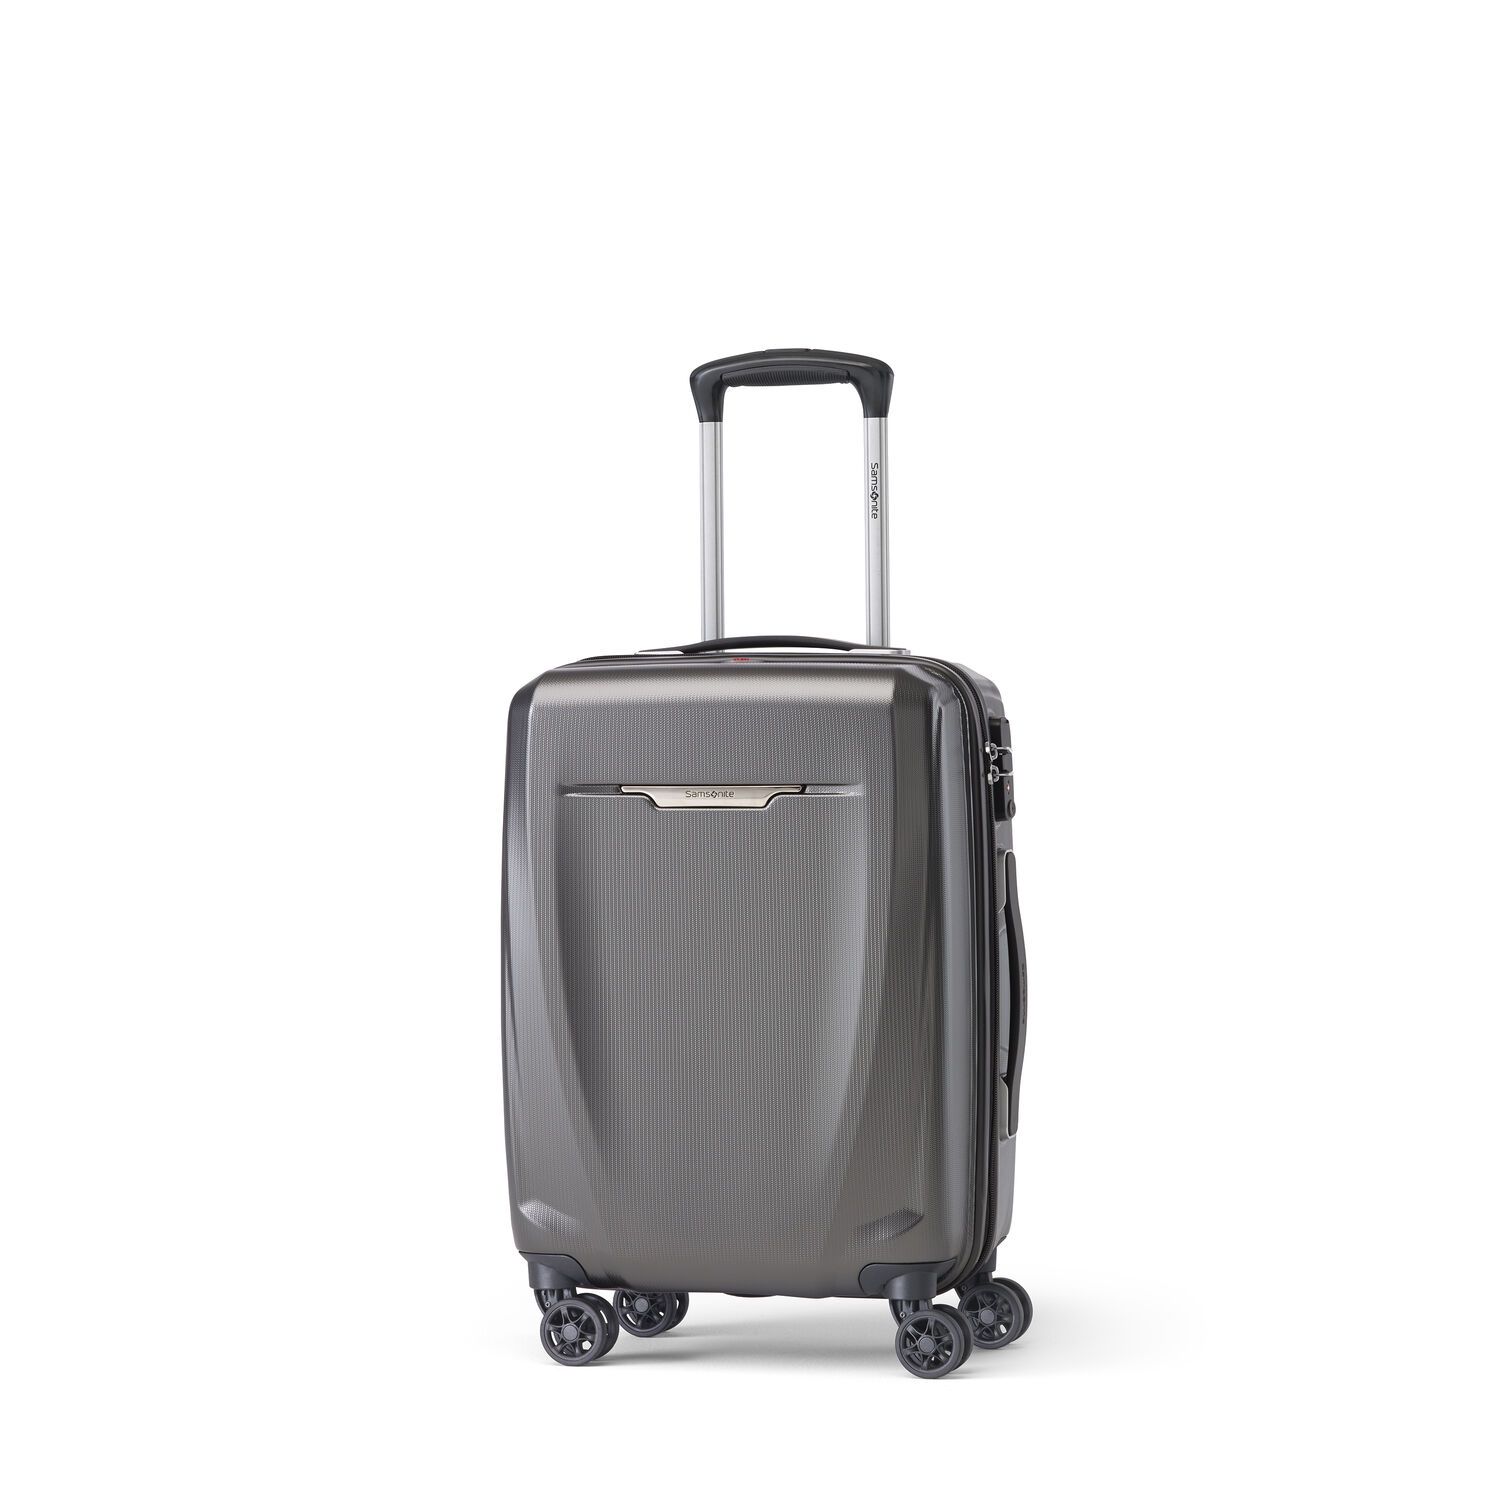 Samsonite Pursuit DLX Plus Spinner Carry-On Luggage - Charcoal